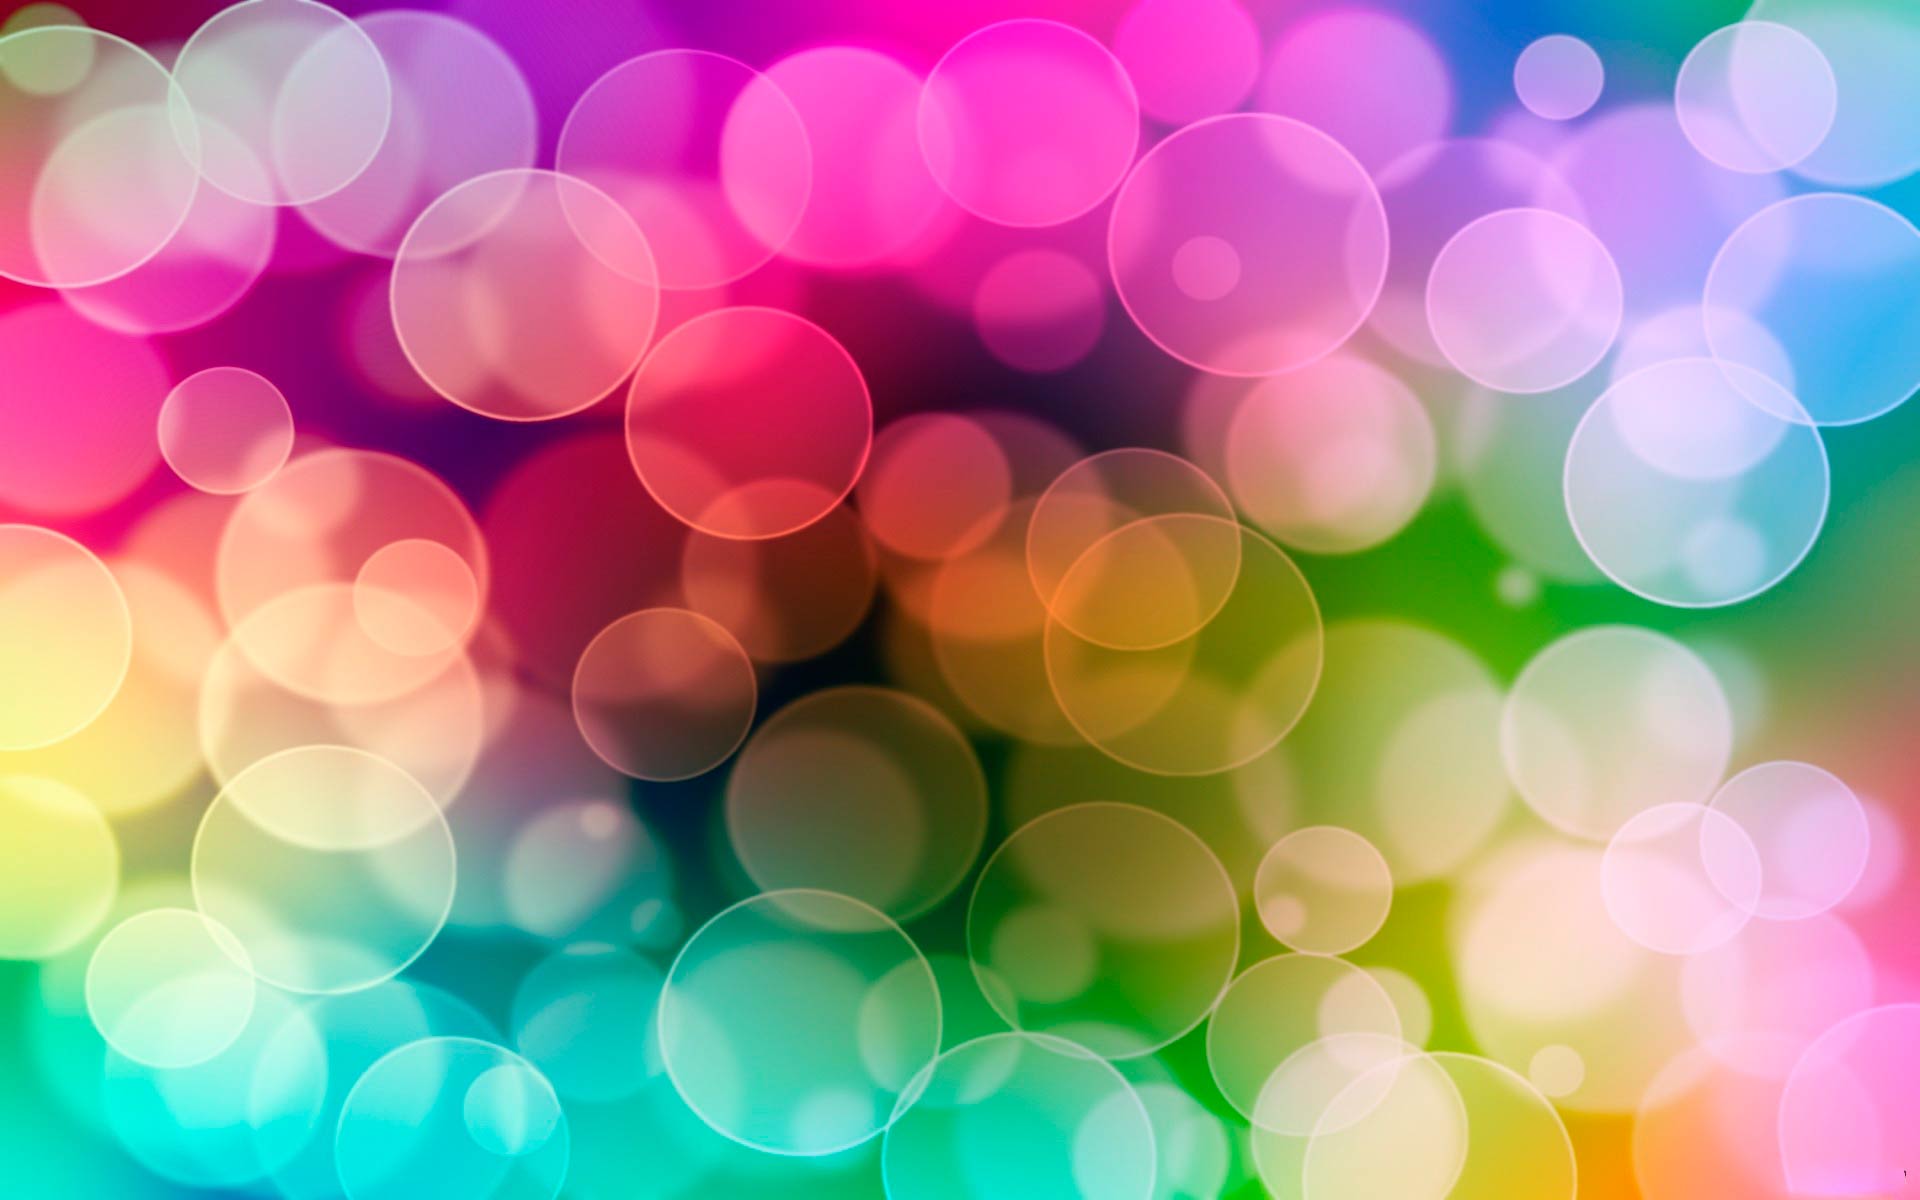 Colorful Abstract Wallpaper HD In Imageci